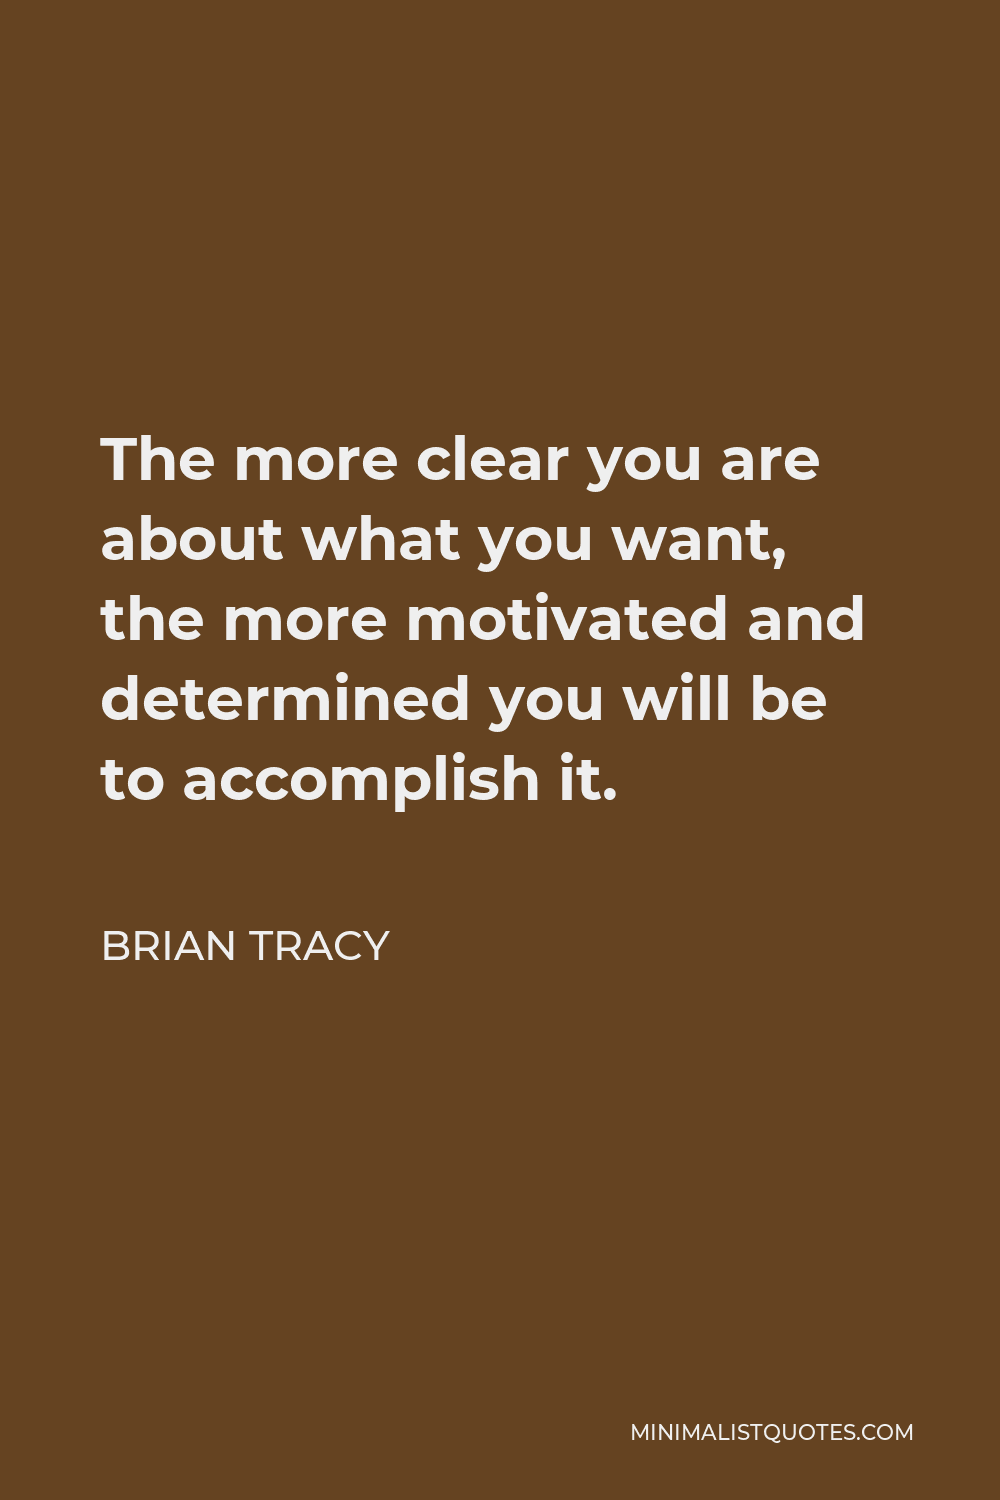 Brian Tracy Quote - The more clear you are about what you want, the more motivated and determined you will be to accomplish it.